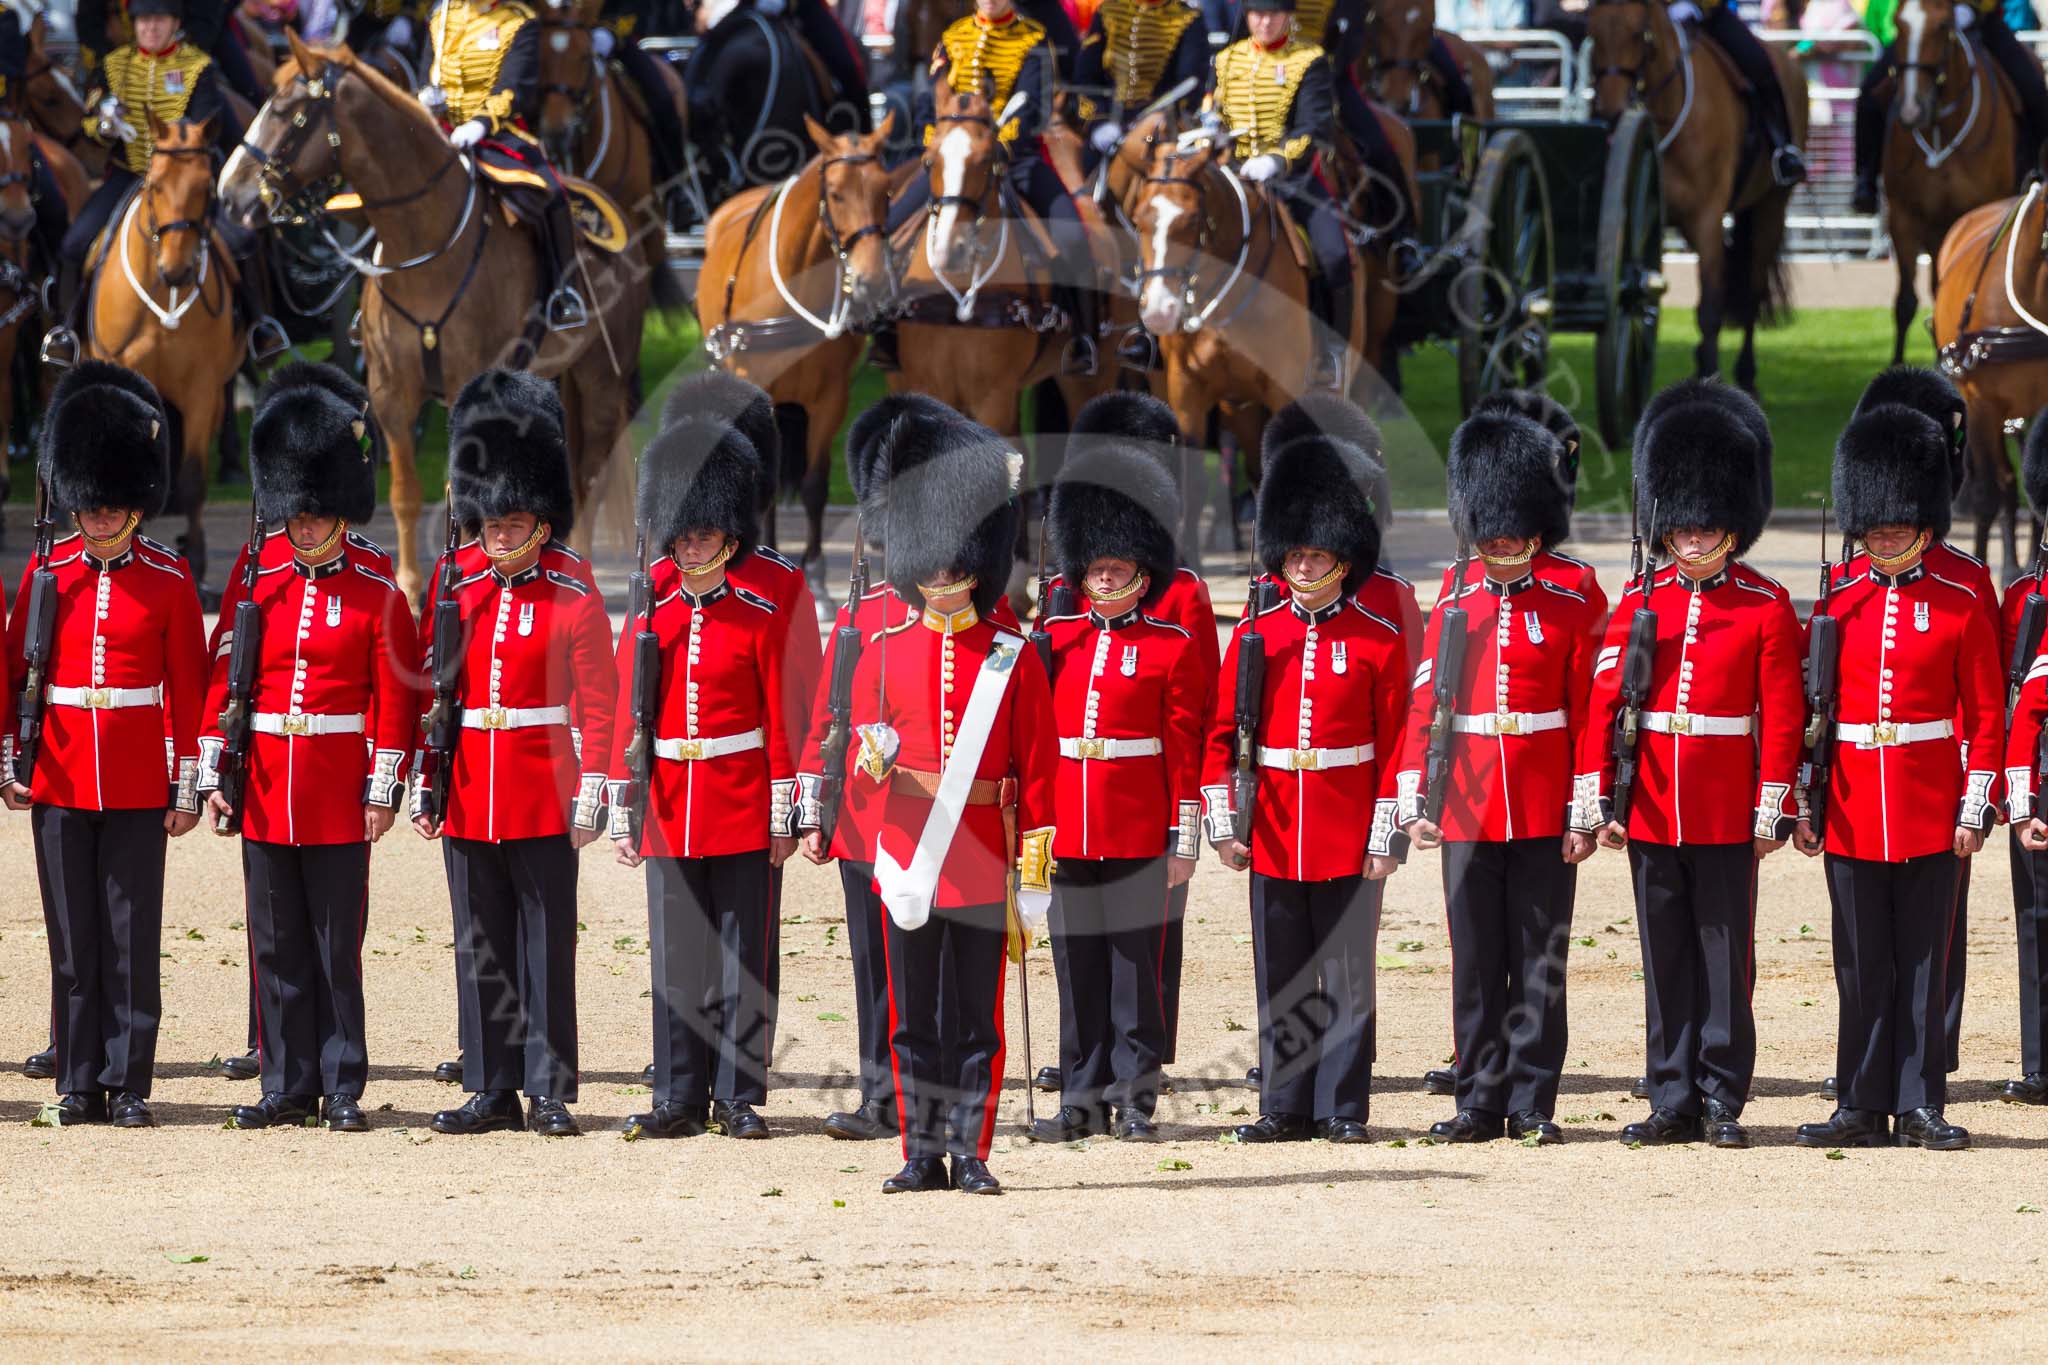 The Colonel's Review 2015.
Horse Guards Parade, Westminster,
London,

United Kingdom,
on 06 June 2015 at 11:13, image #287